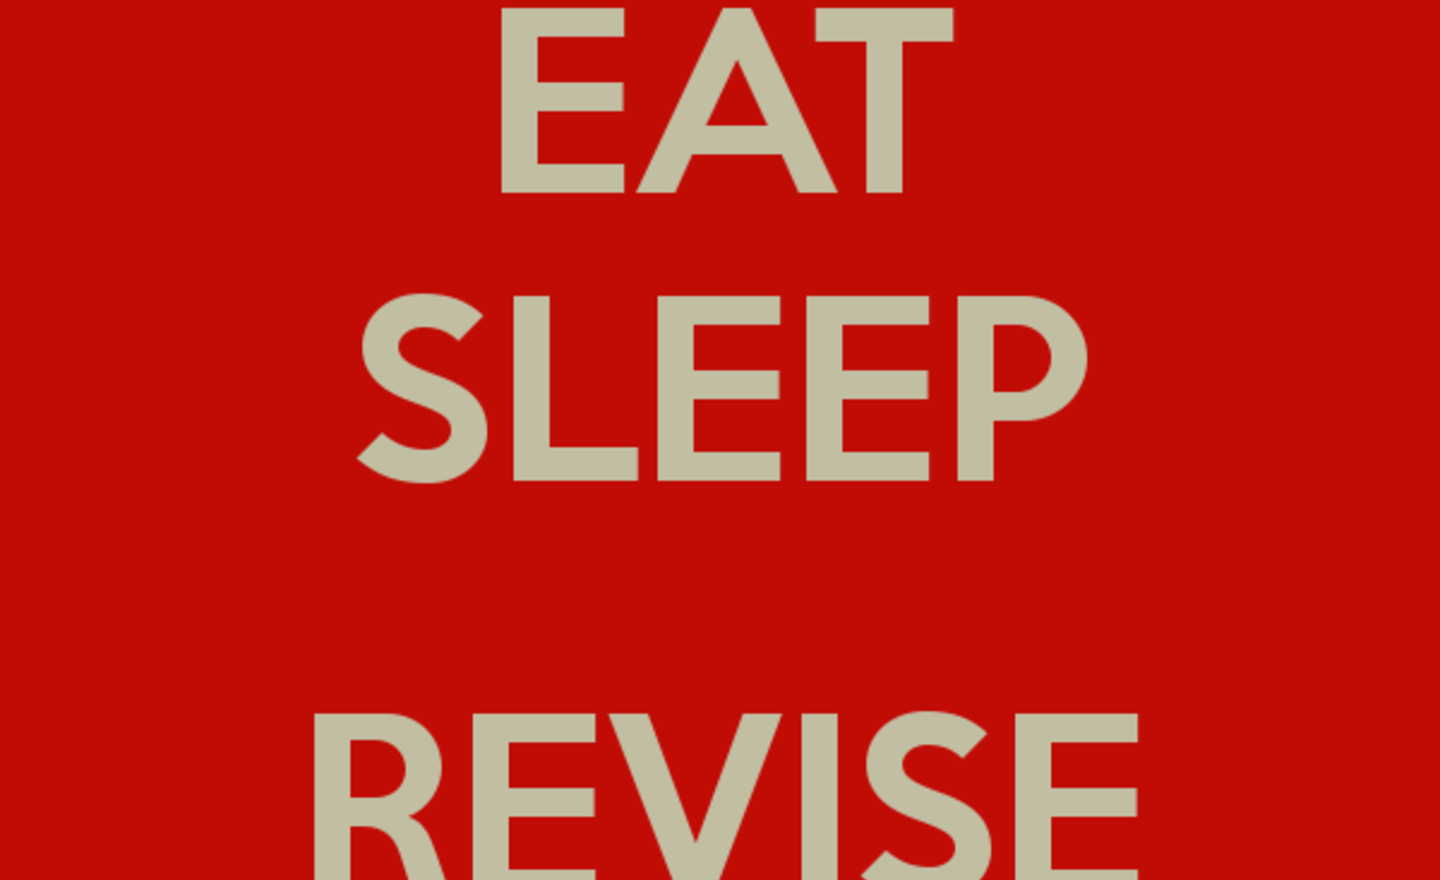 Image of Revision